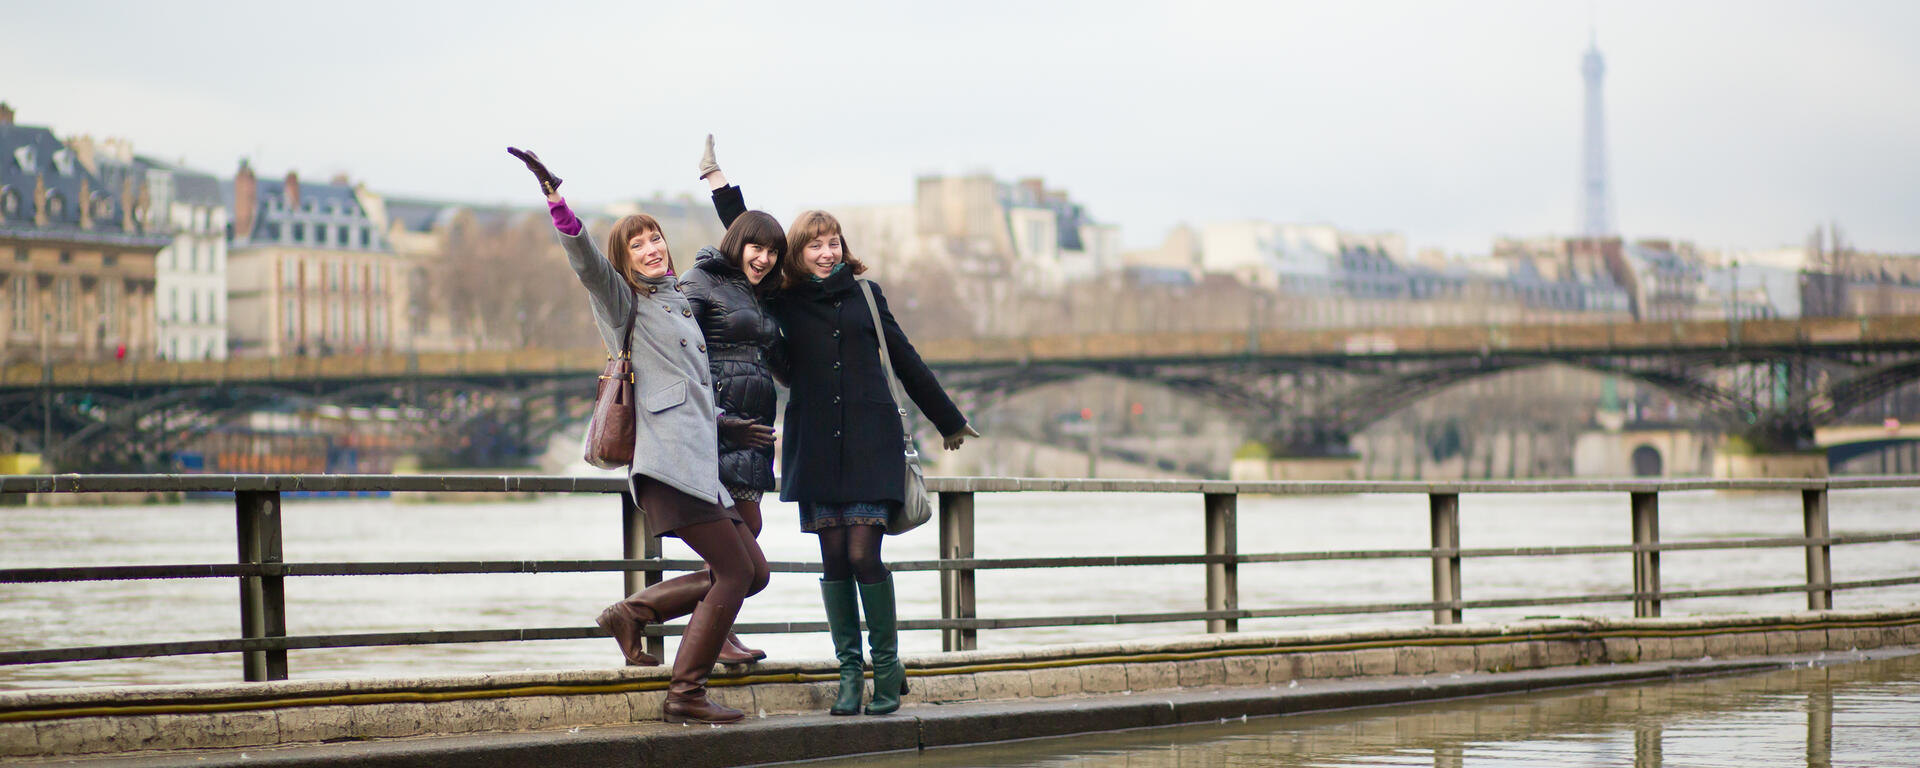 Colourbox stock photo of young women waving on a bridge in Paris